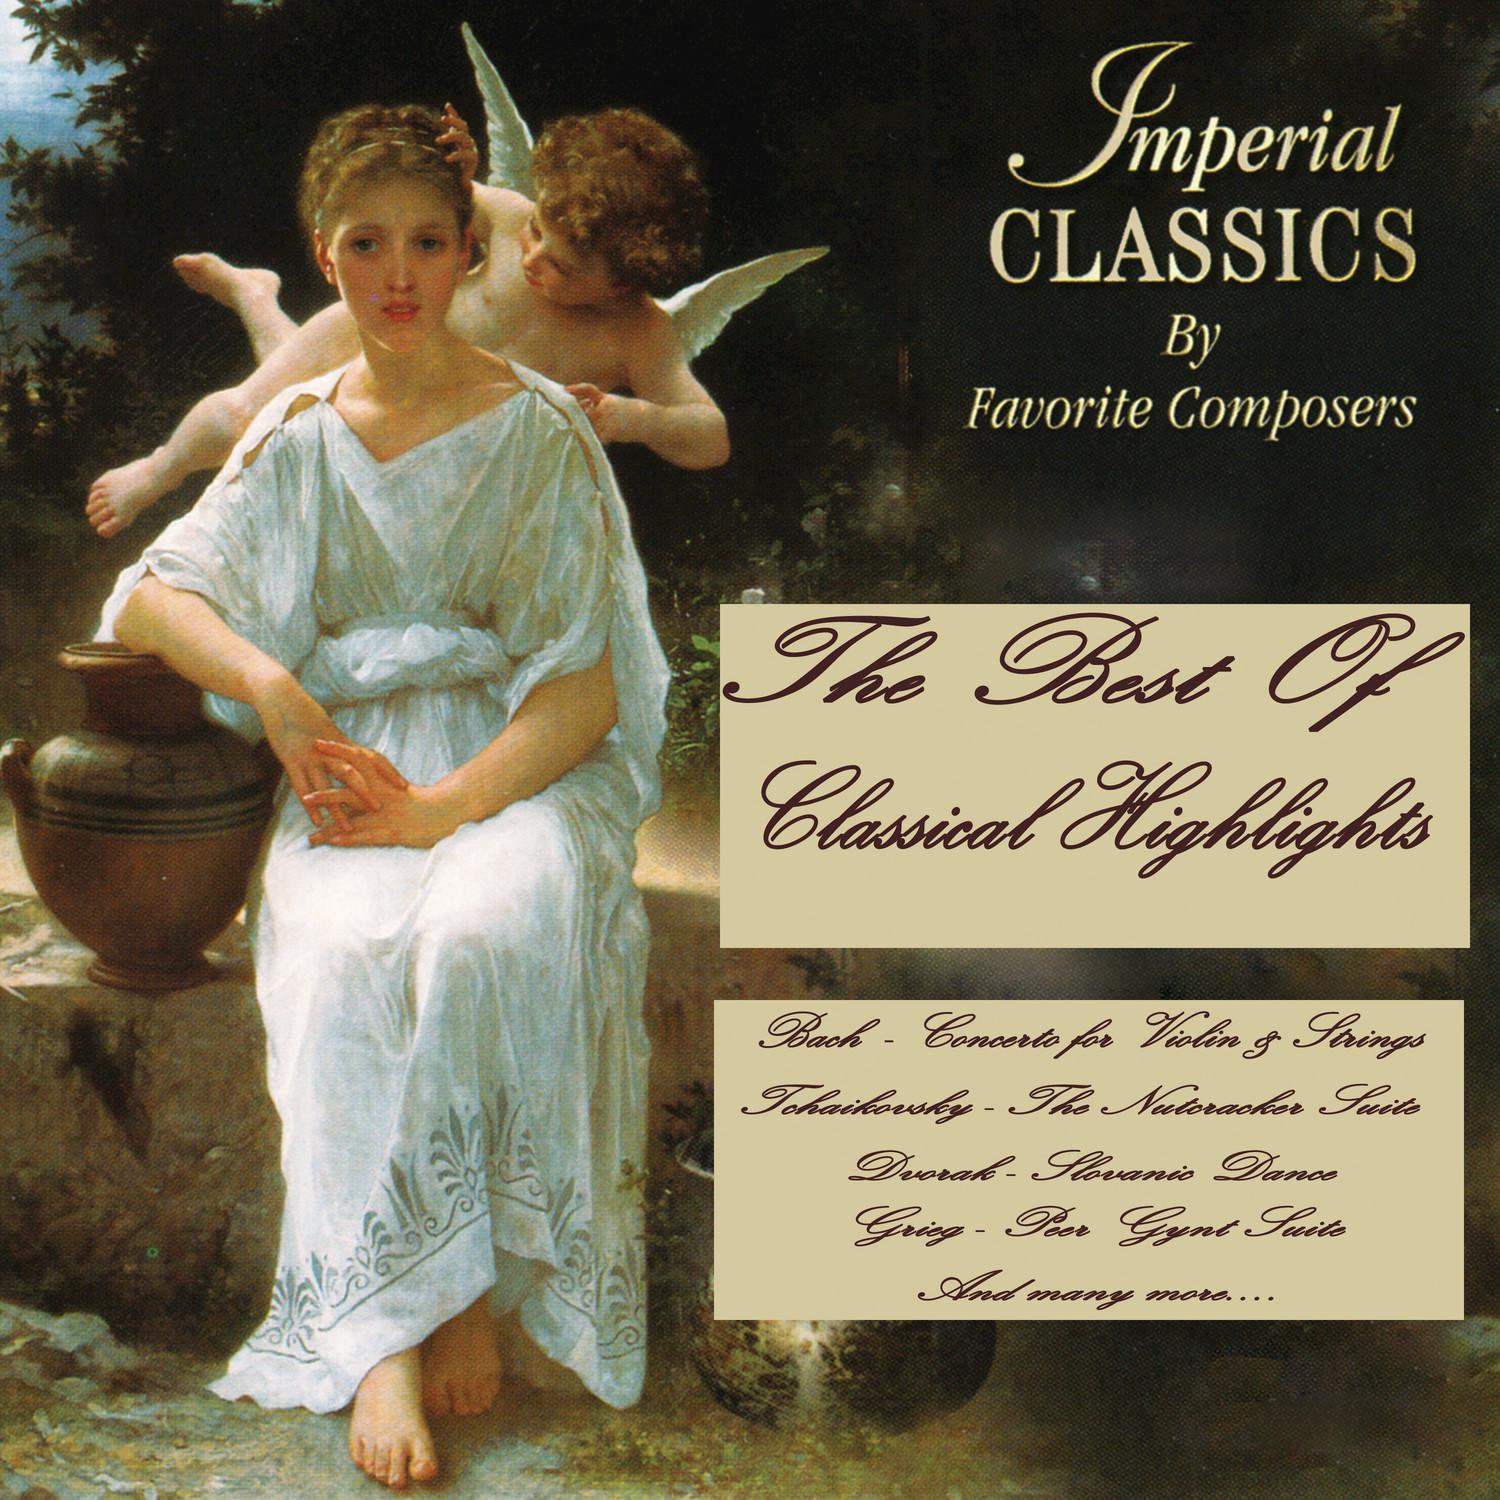 Imperial Classics: Best of Classical Highlights